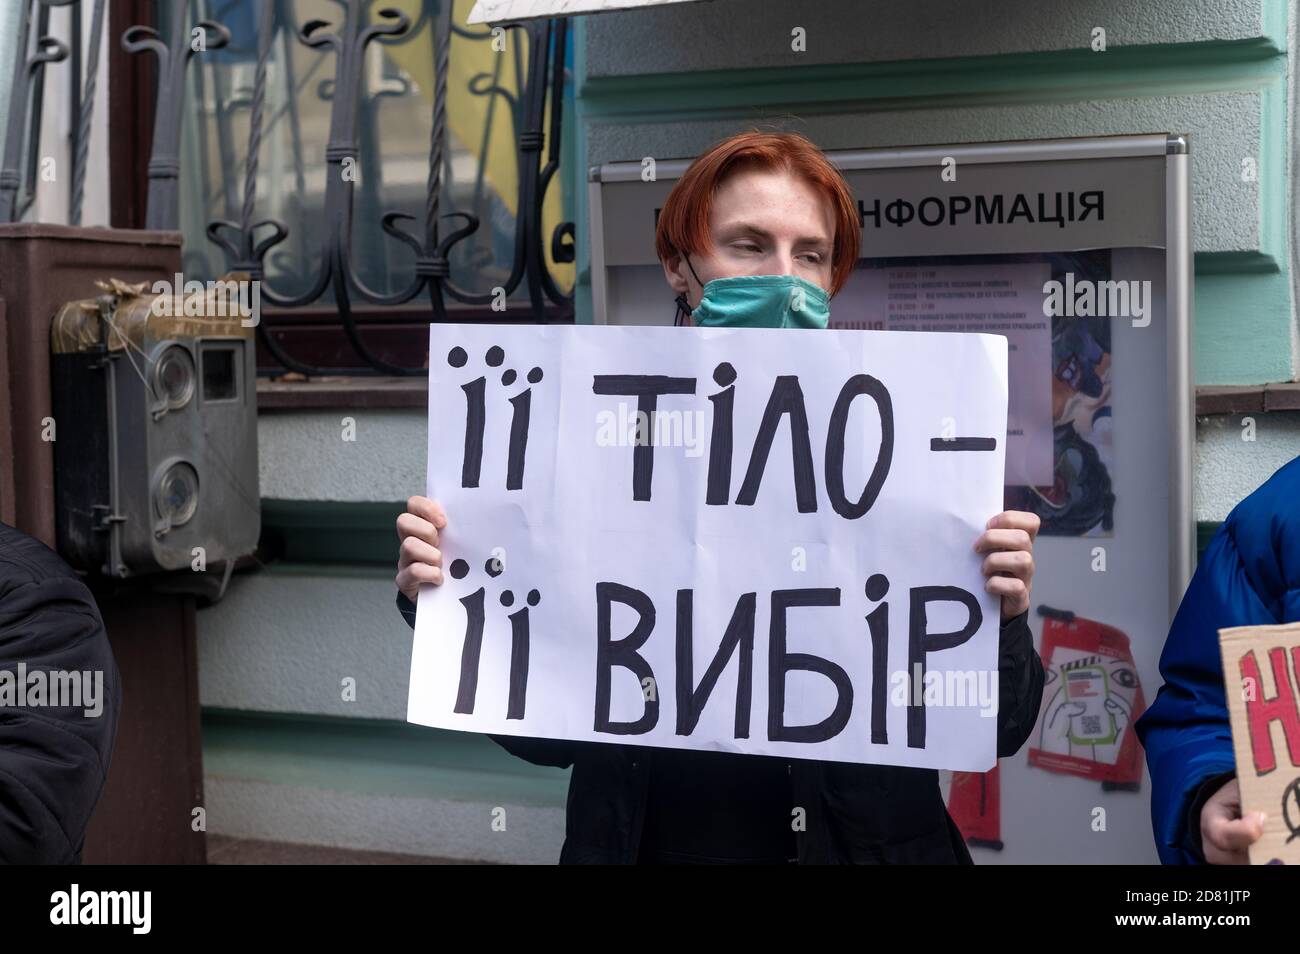 KHARKIV, UKRAINE - OCTOBER 26, 2020: Action to support abortion and induced termination of pregnancy in Kharkov near the Embassy of Poland. Stock Photo